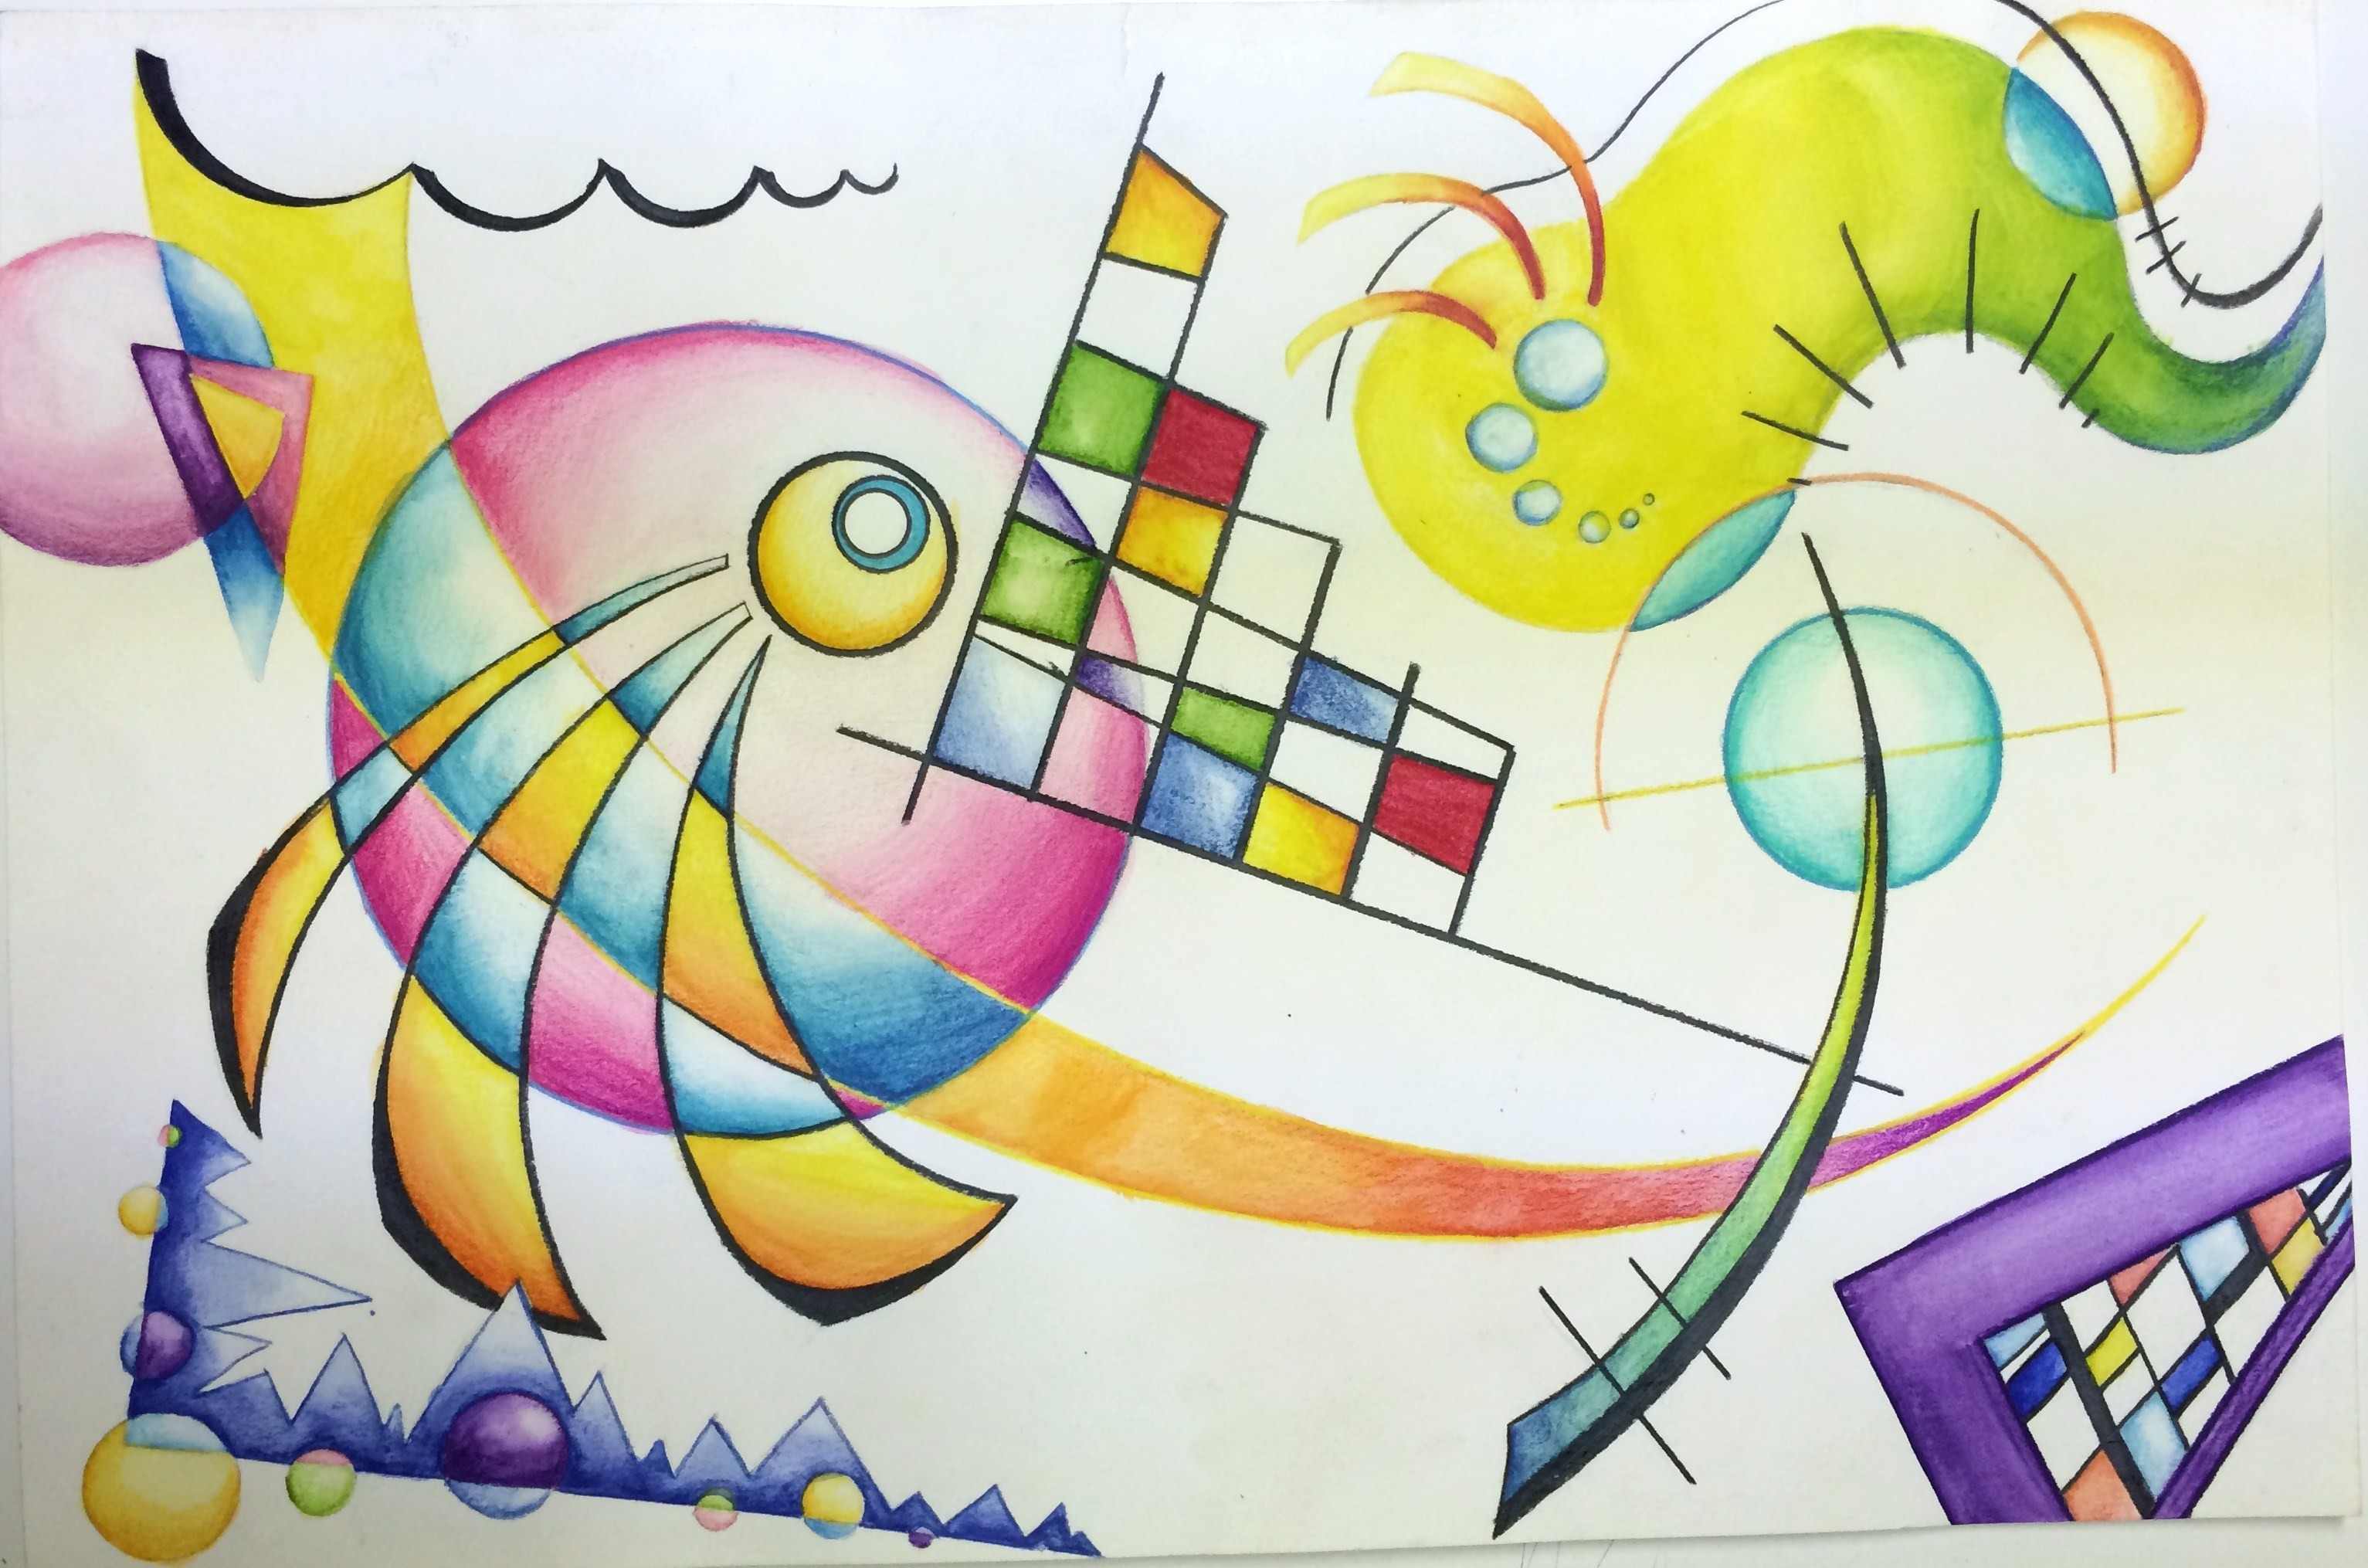 3066x2030 Wassily Kandinsky Non-Objective Color Pencil and Watercolor Pencil .